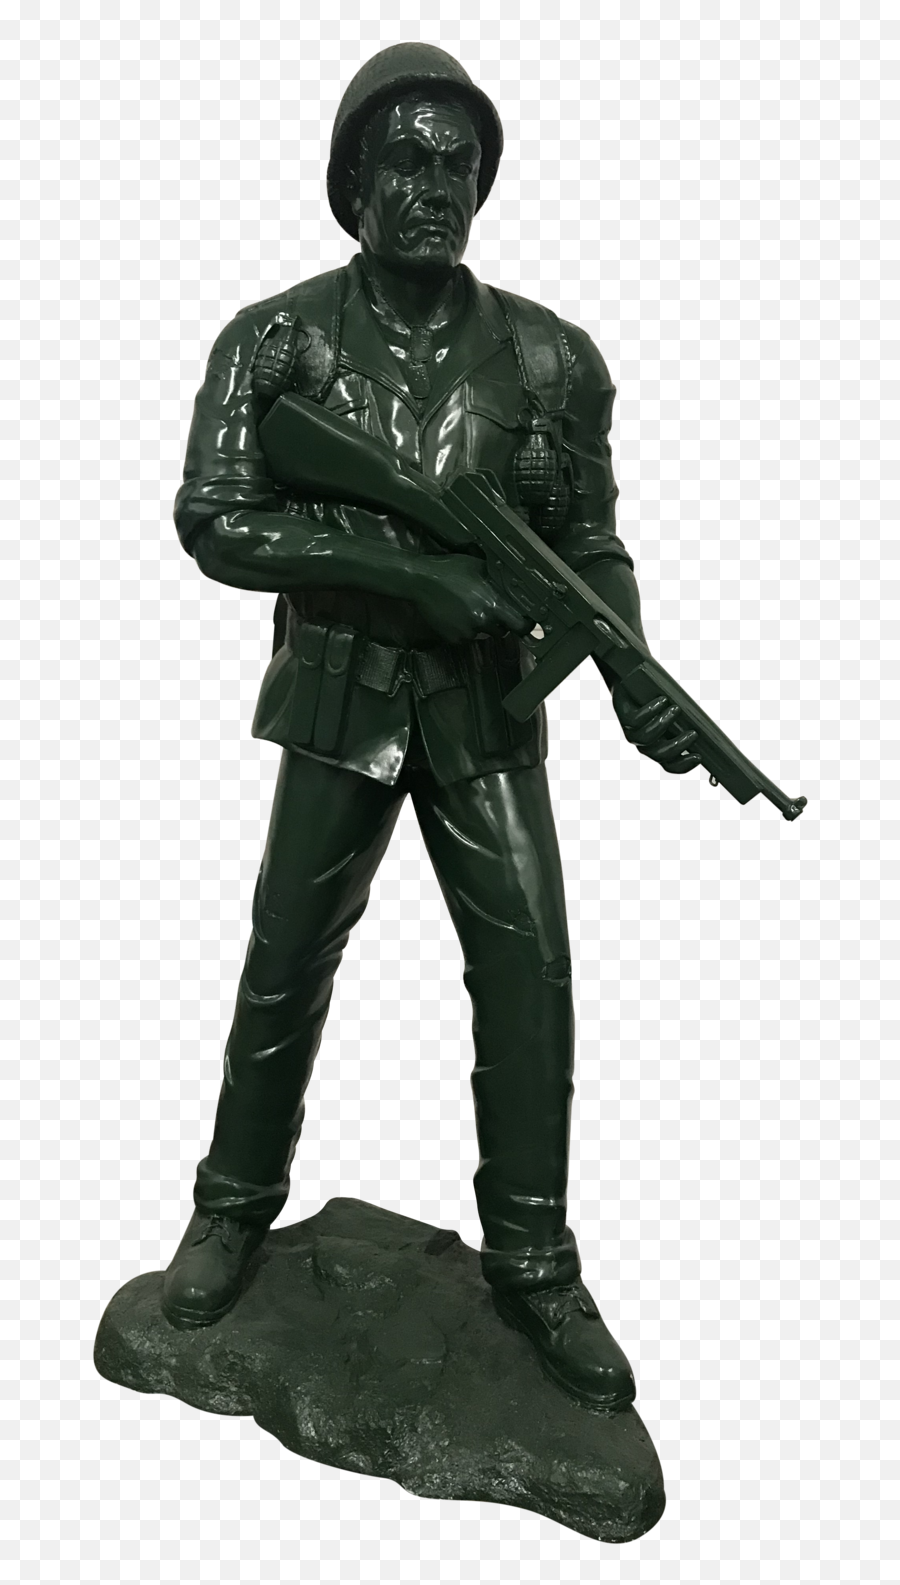 Toy Soldier Png Black And White - Toy Army Soldier Png Toy Soldiers Transparent Emoji,Army Png